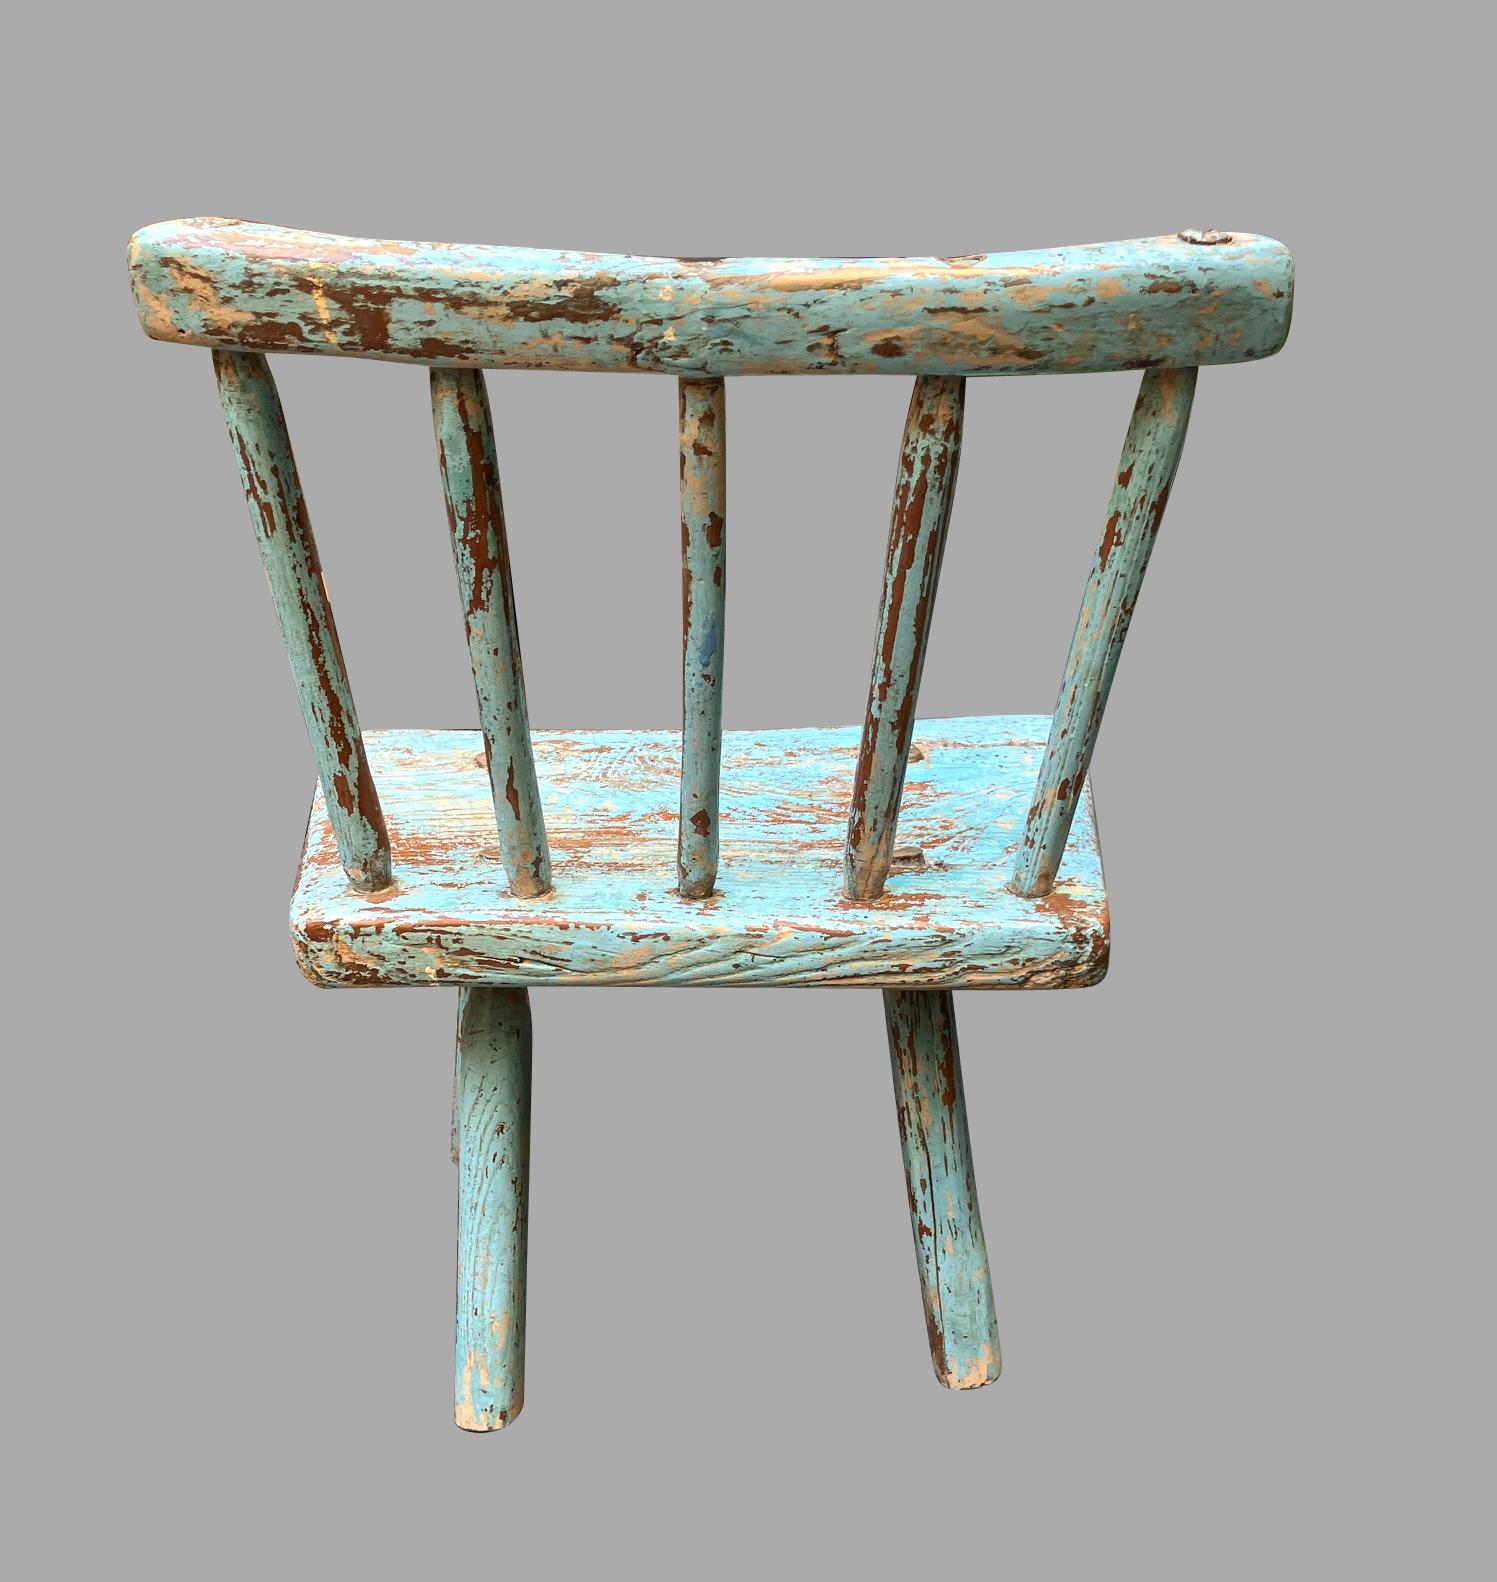 19th Century Charming English Rustic Windsor Child's Chair in Old Blue Paint